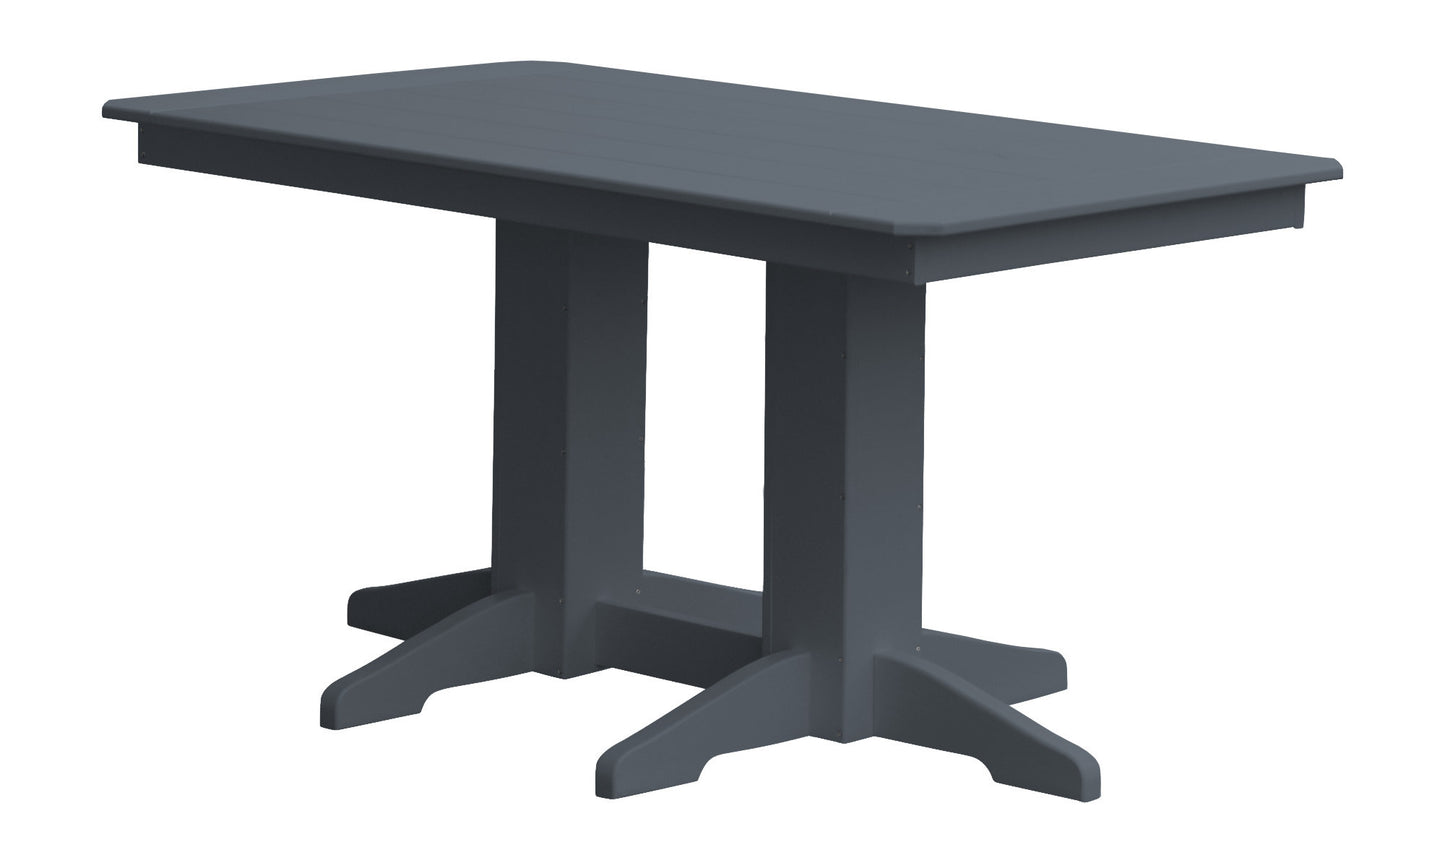 A&L Furniture Company Recycled Plastic 5' Dining Table - Dark Gray